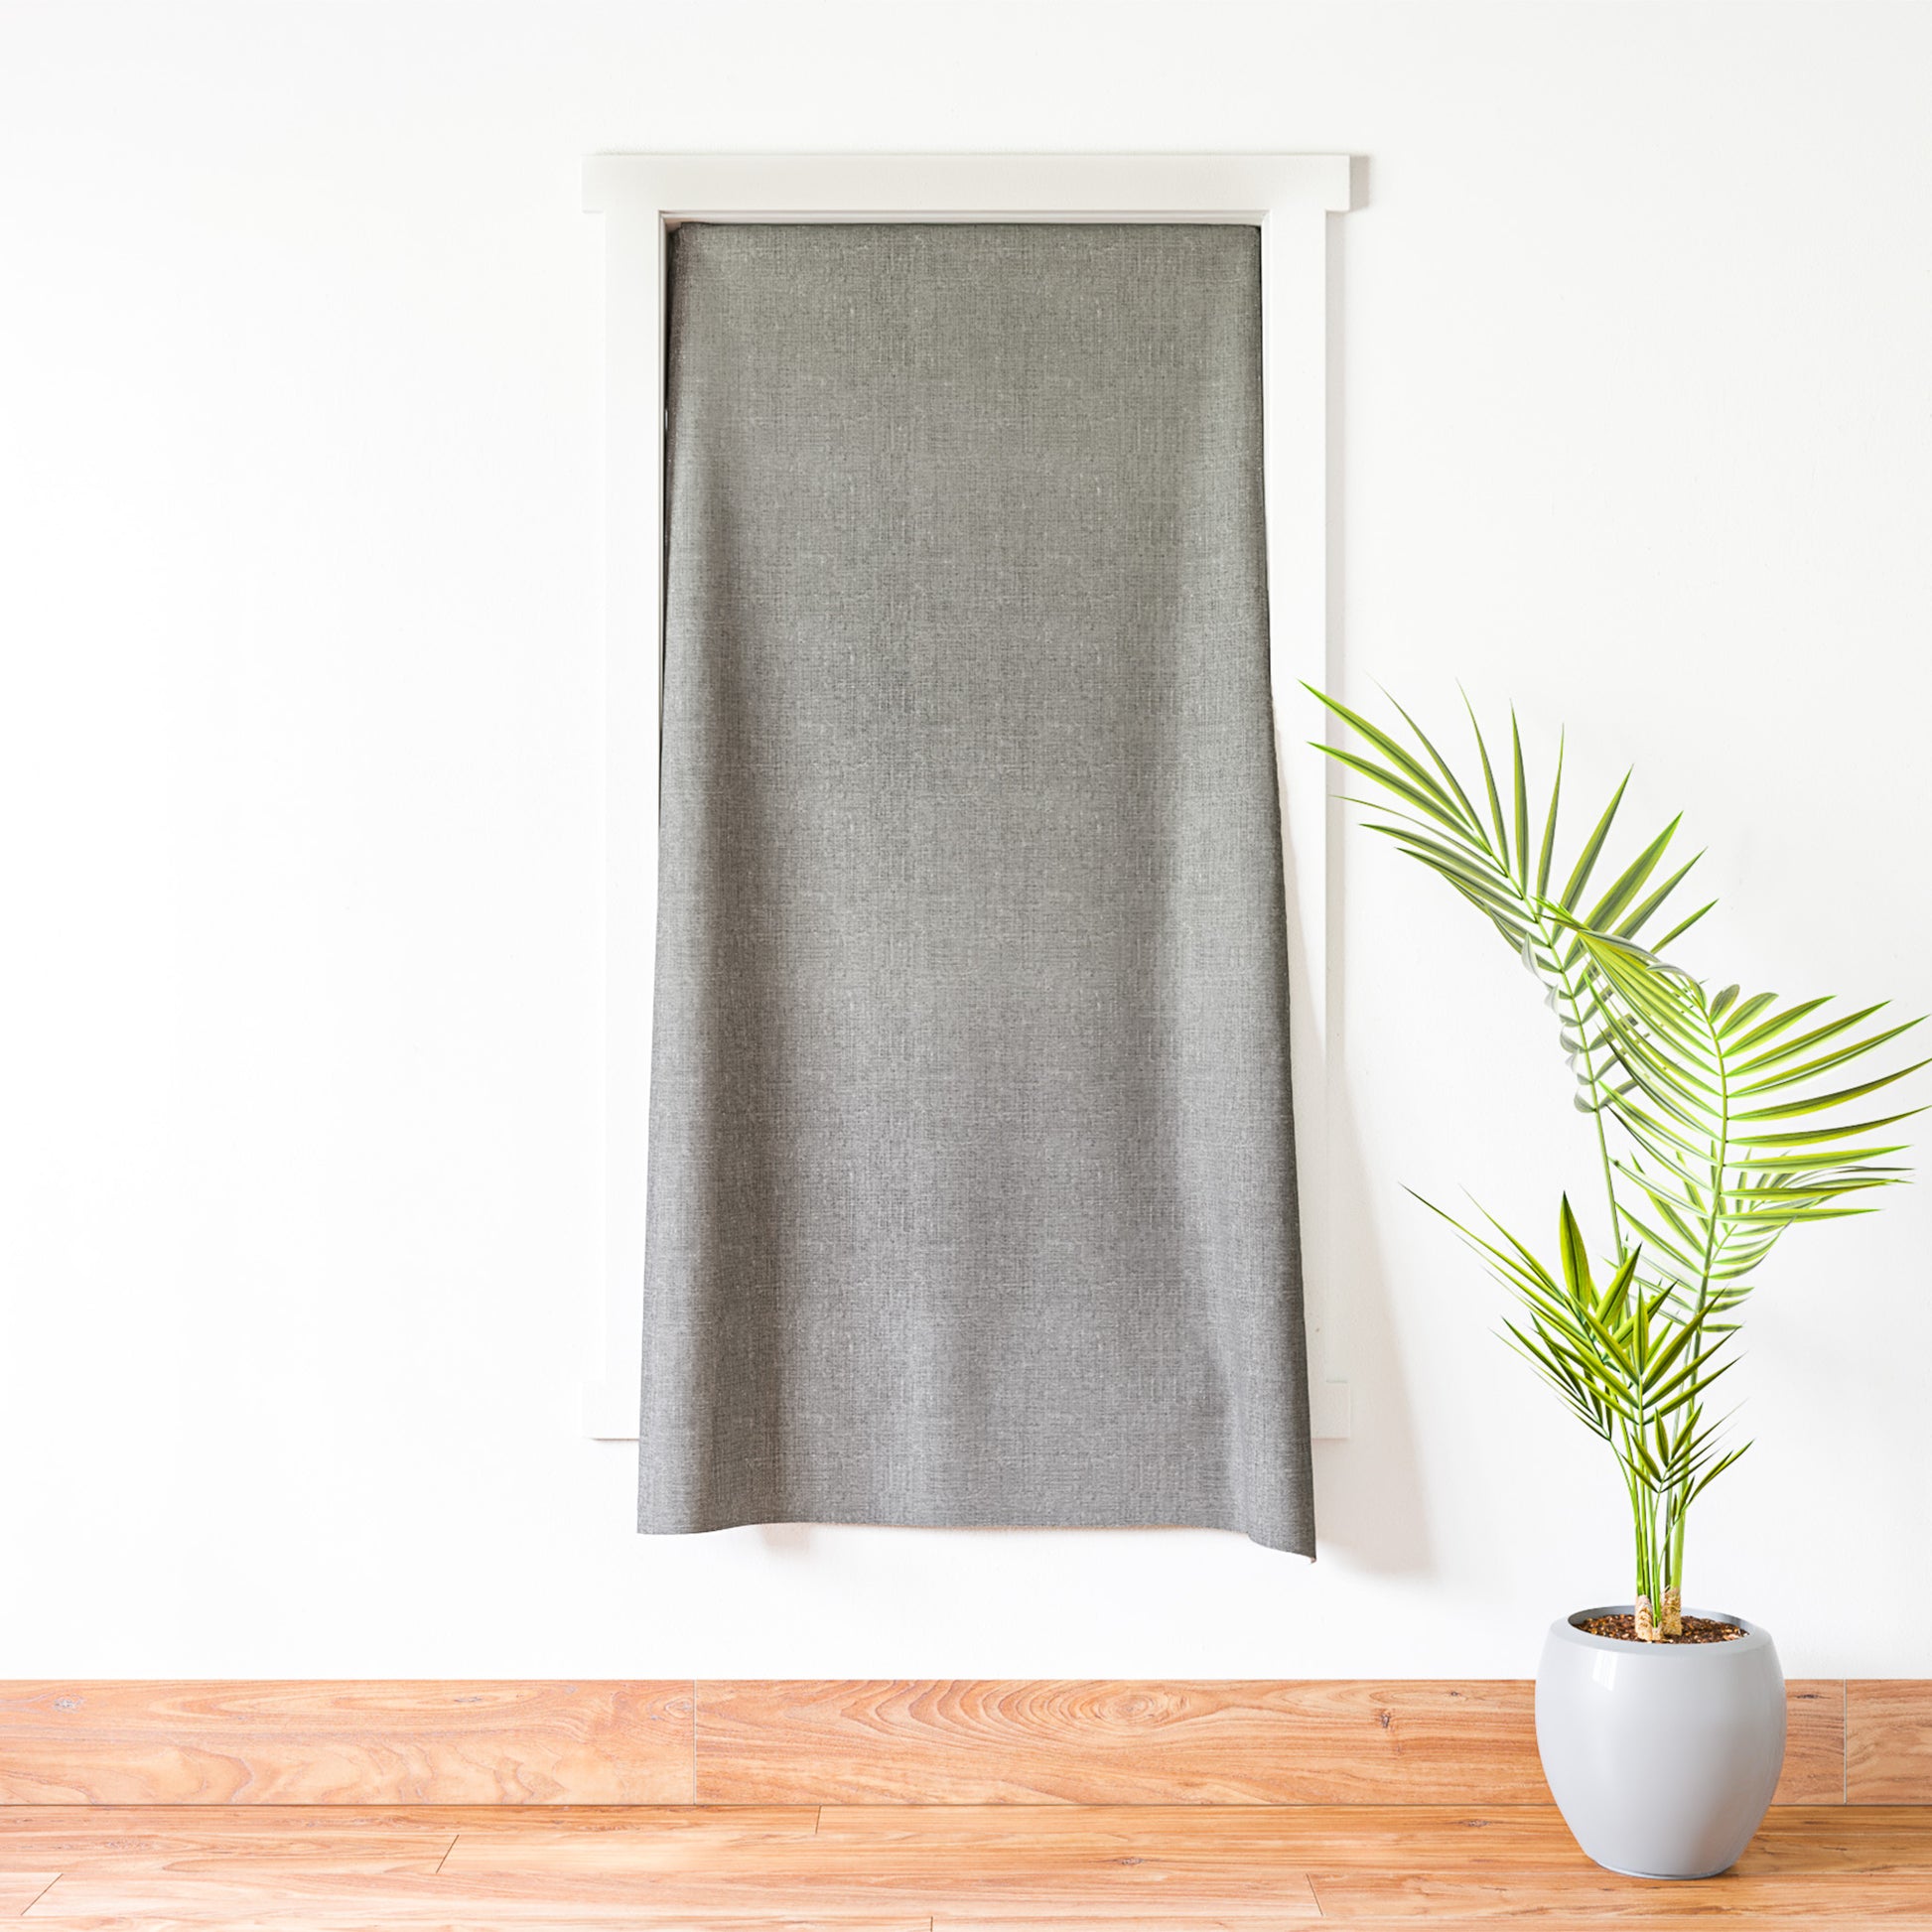 Blackout Curtains, Portable Window Curtain Shade 100% Black Out Room  Darkening Light Blocking Drapes For Bedroom Living Room